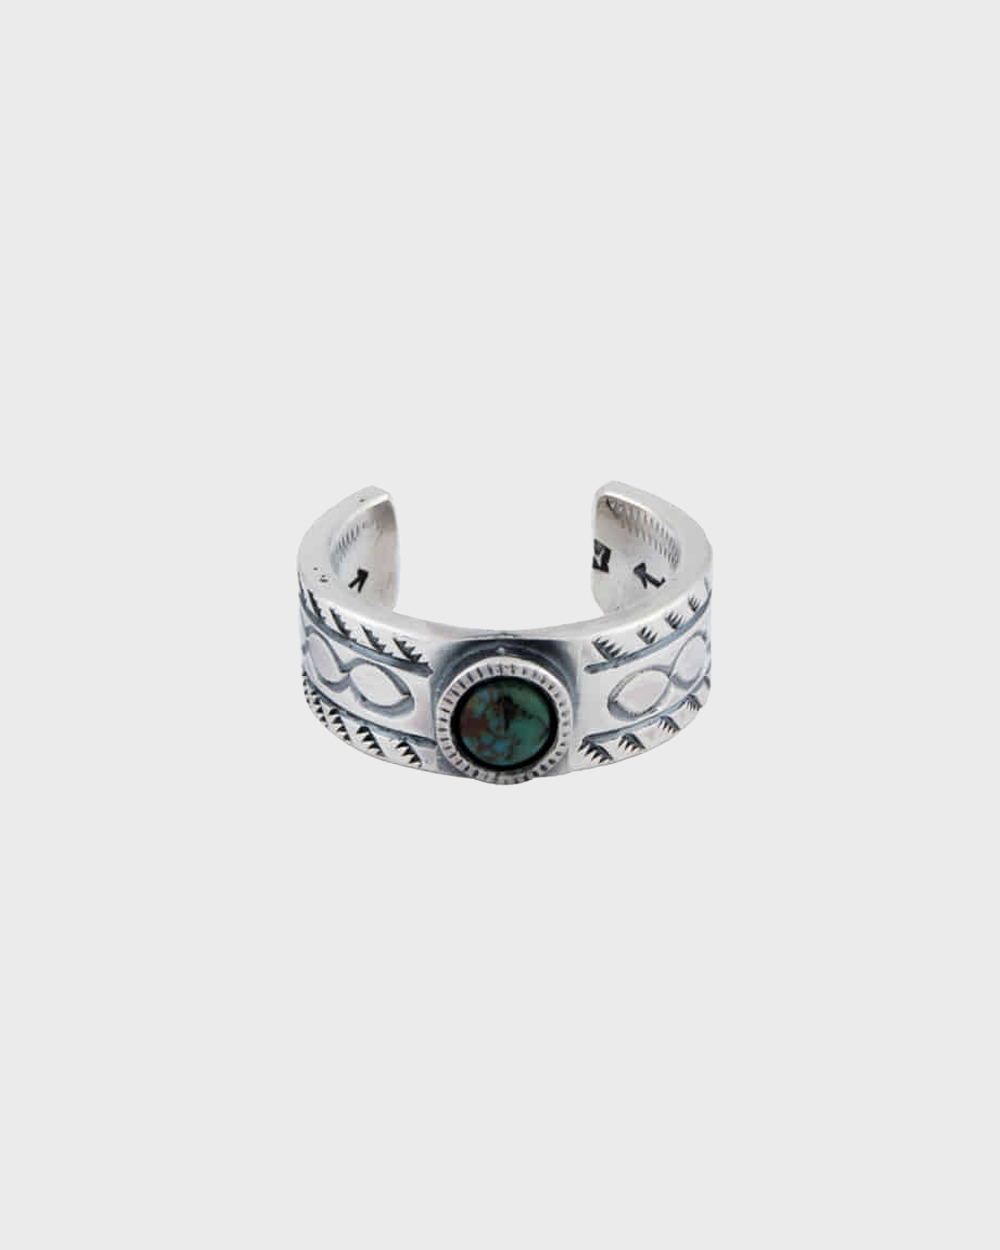 900 Silver Turquoise Stamp Ring (W-320C)